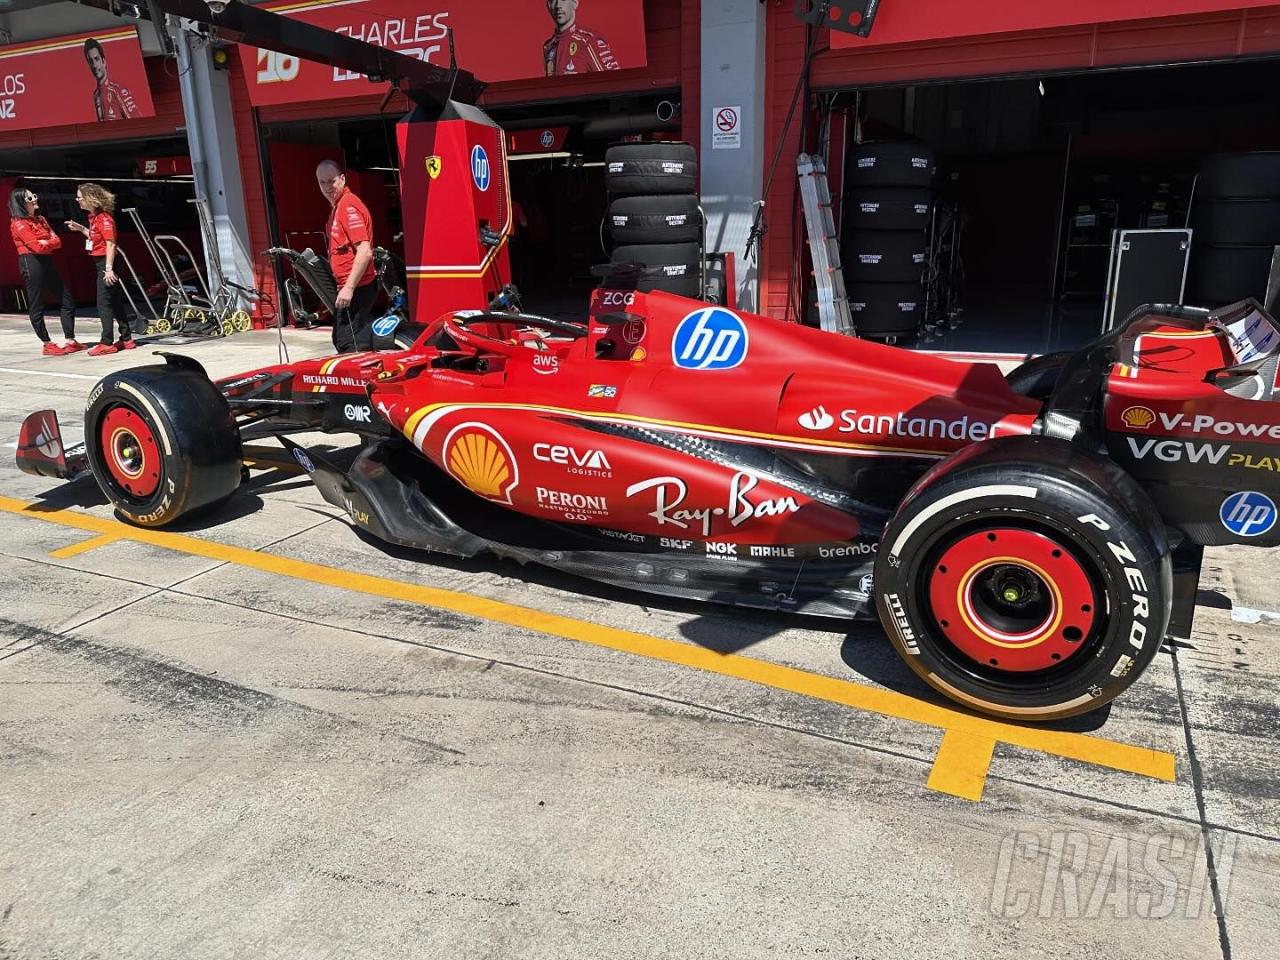 Our paddock insider spots crucial Ferrari, Red Bull, Mercedes upgrades at Imola